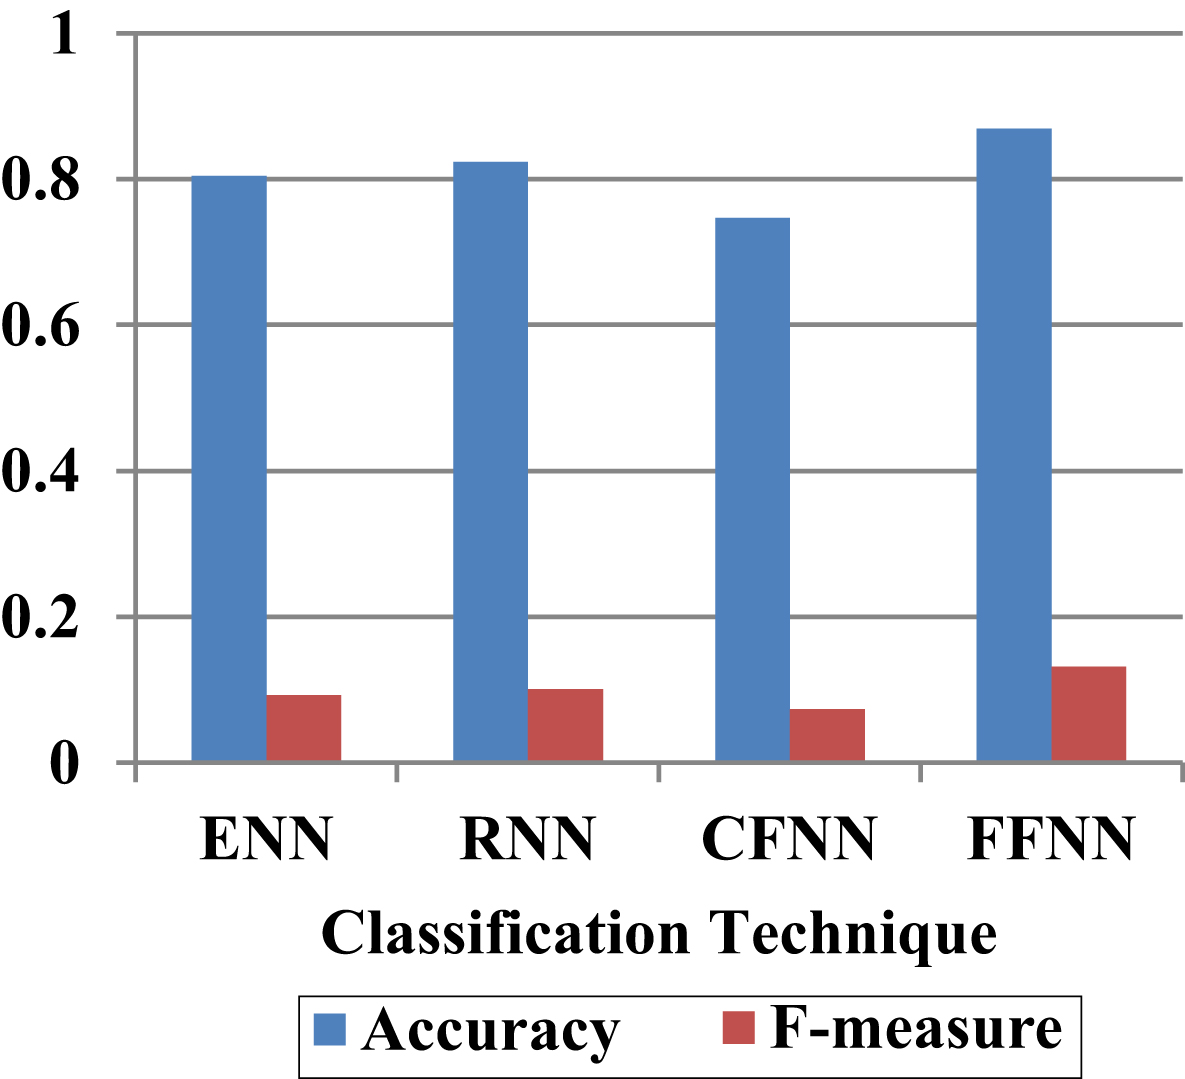 Evaluation of FFNN With Financial Derivative Features in terms of accurateness and F-measure.